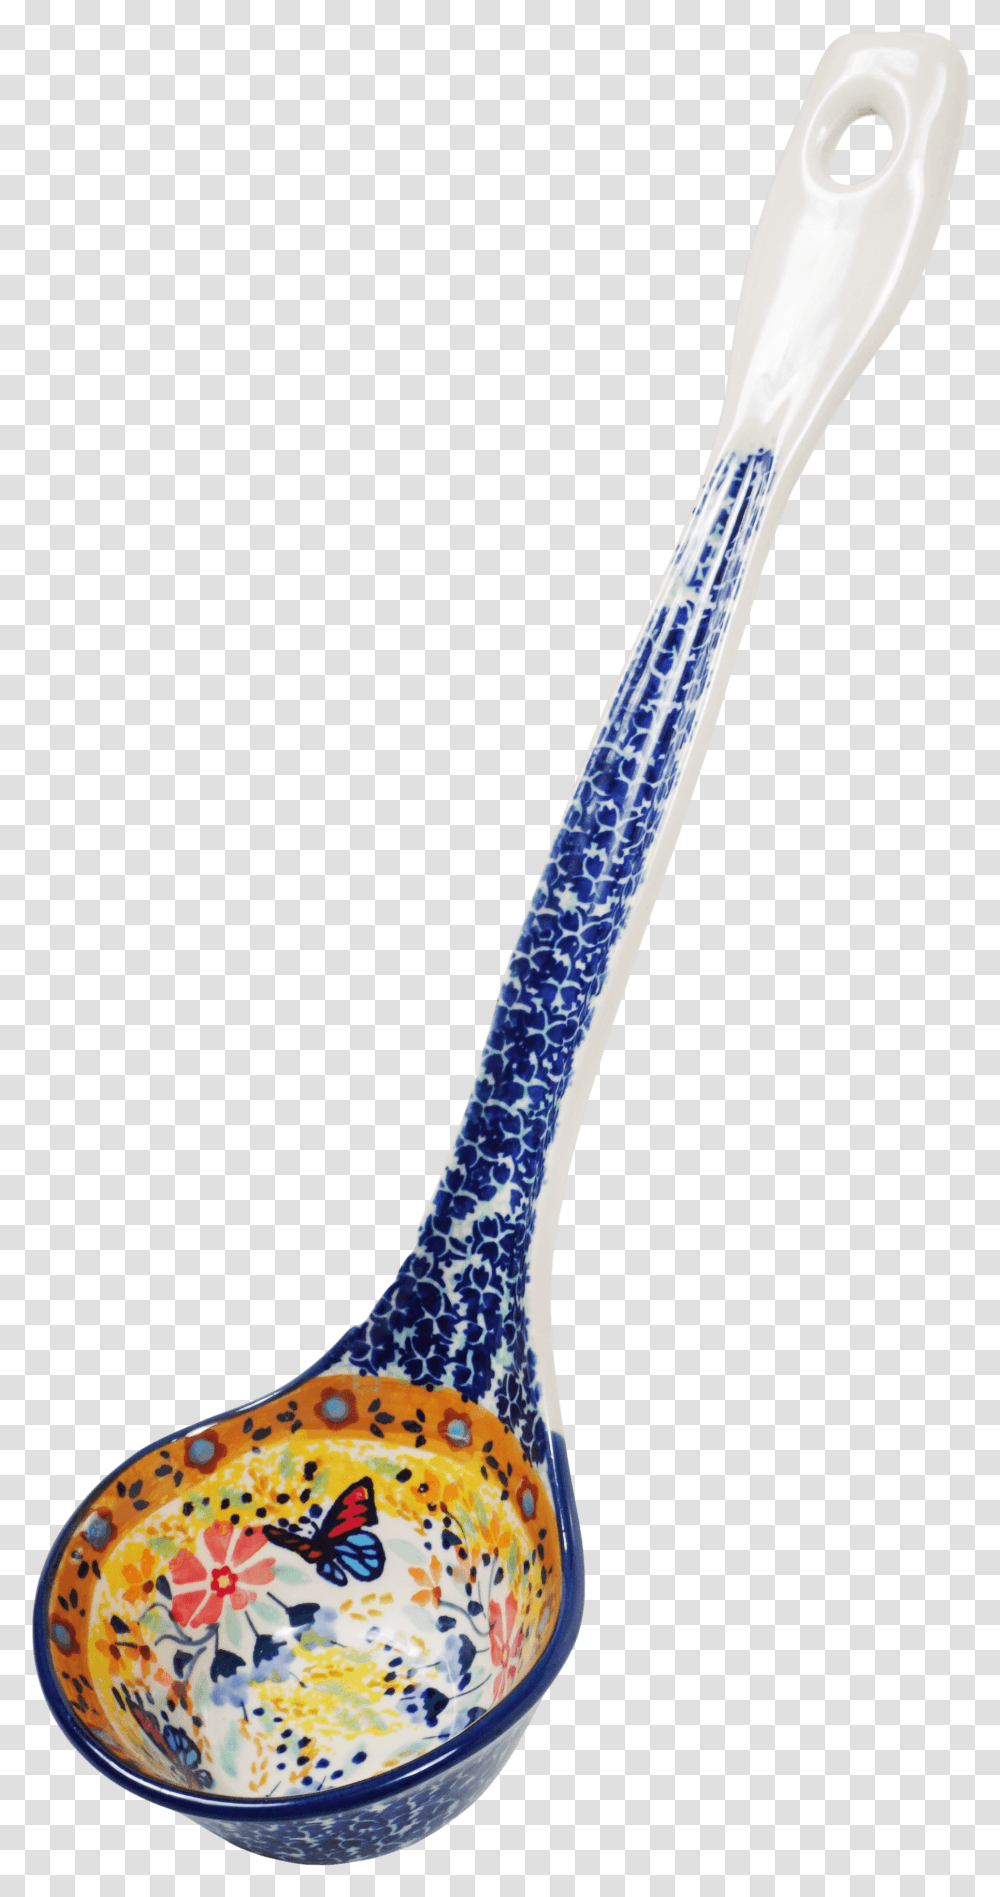 Class Lazyload Lazyload Mirage Cloudzoom Featured Image Blue And White Porcelain, Spoon, Cutlery, Weapon, Weaponry Transparent Png